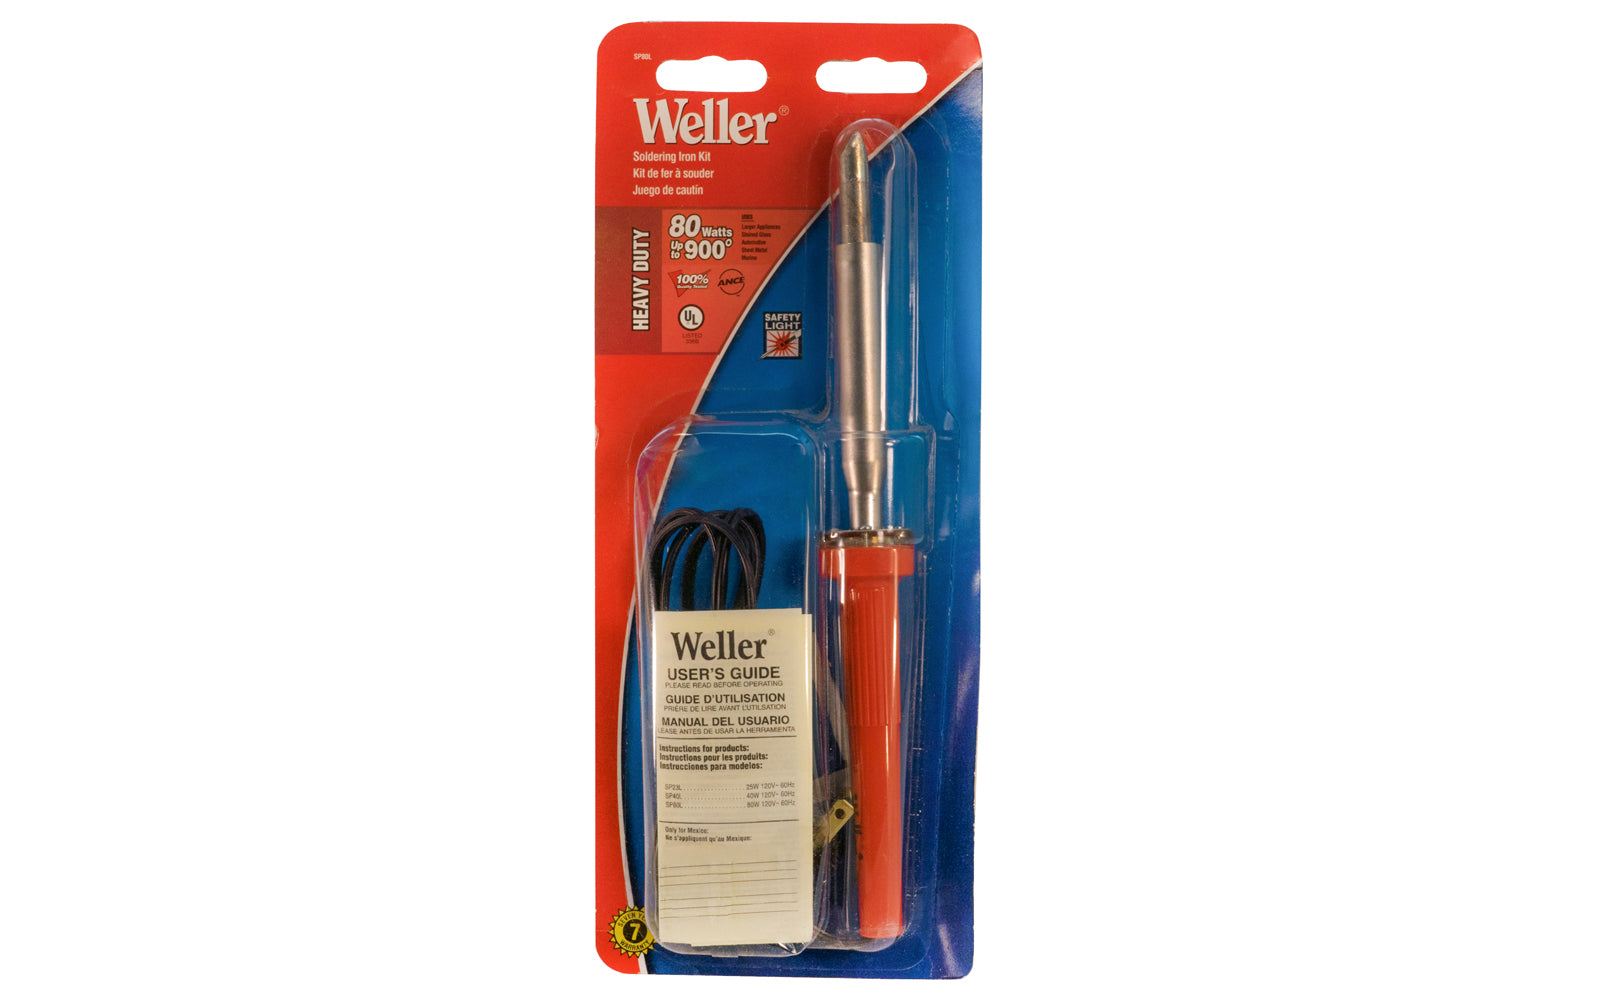 Weller 80W Heavy Duty Soldering Iron Kit. Kit includes 3/8" chisel tip & stand.  Made by Weller - Apex Tool Group. 037103169167